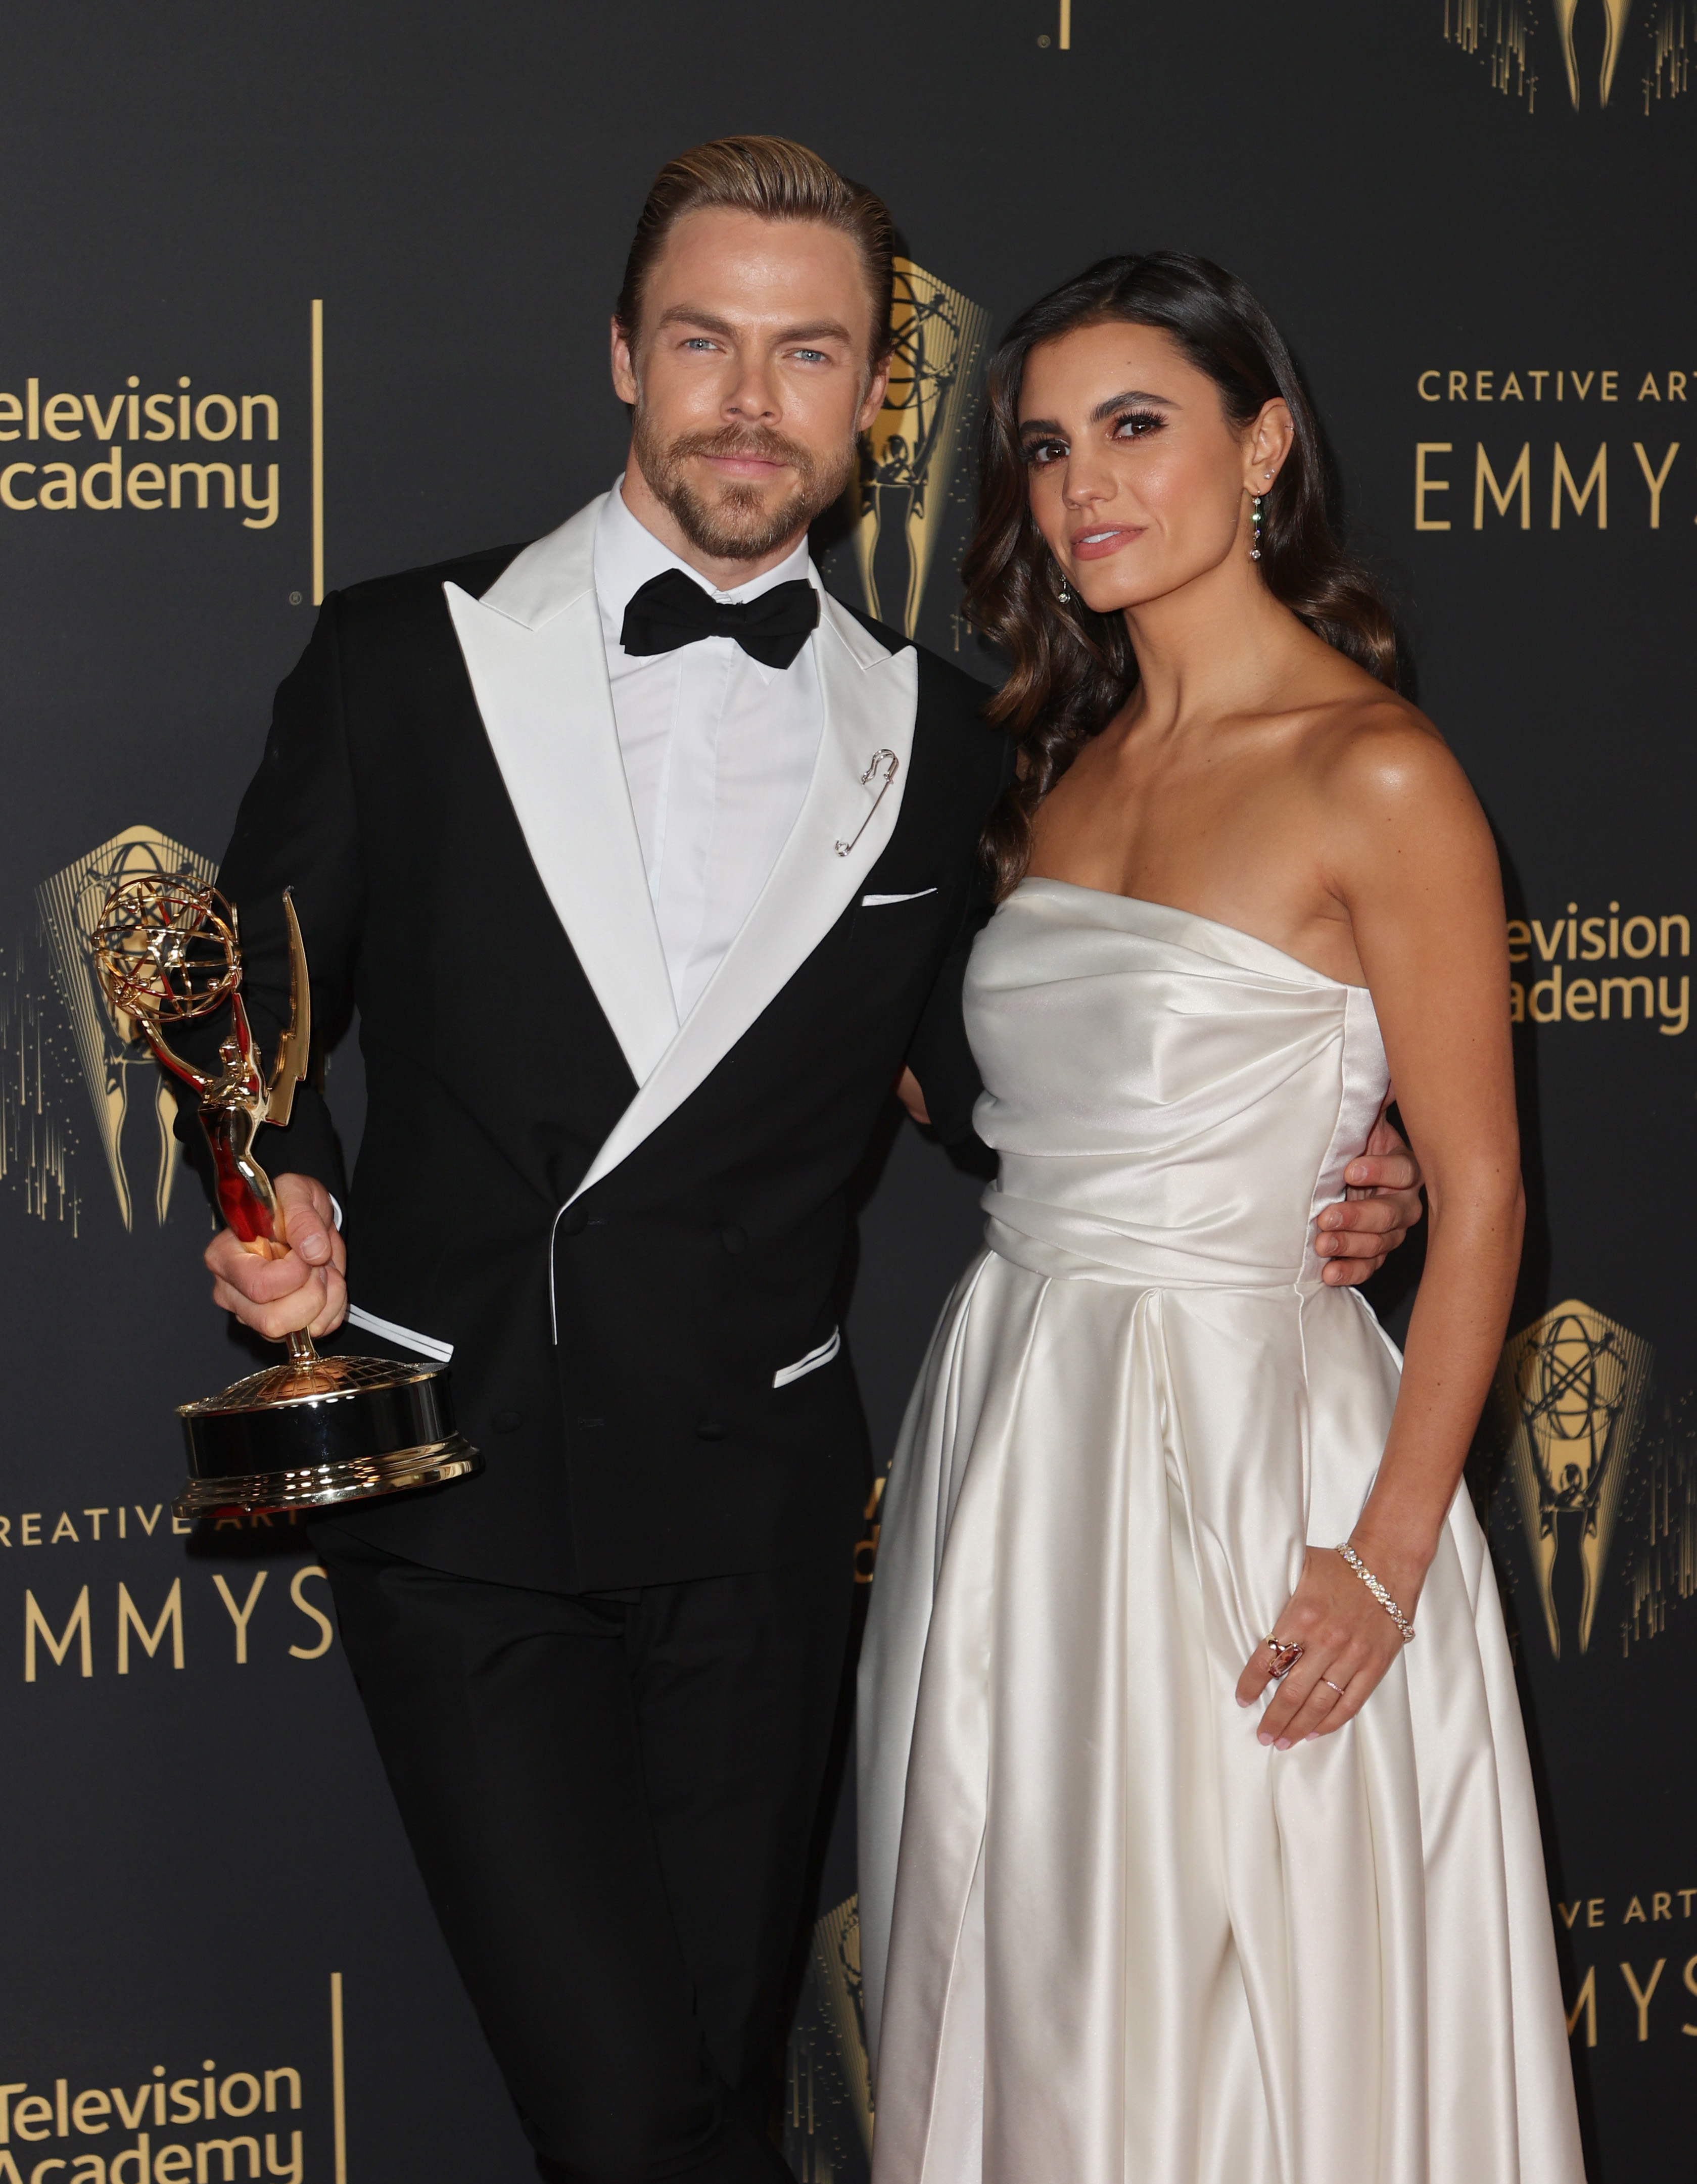 Derek Hough and Hayley Erbert attend the 2021 Creative Arts Emmys at Microsoft Theater on September 12, 2021 in Los Angeles, California  | Source: Getty Images